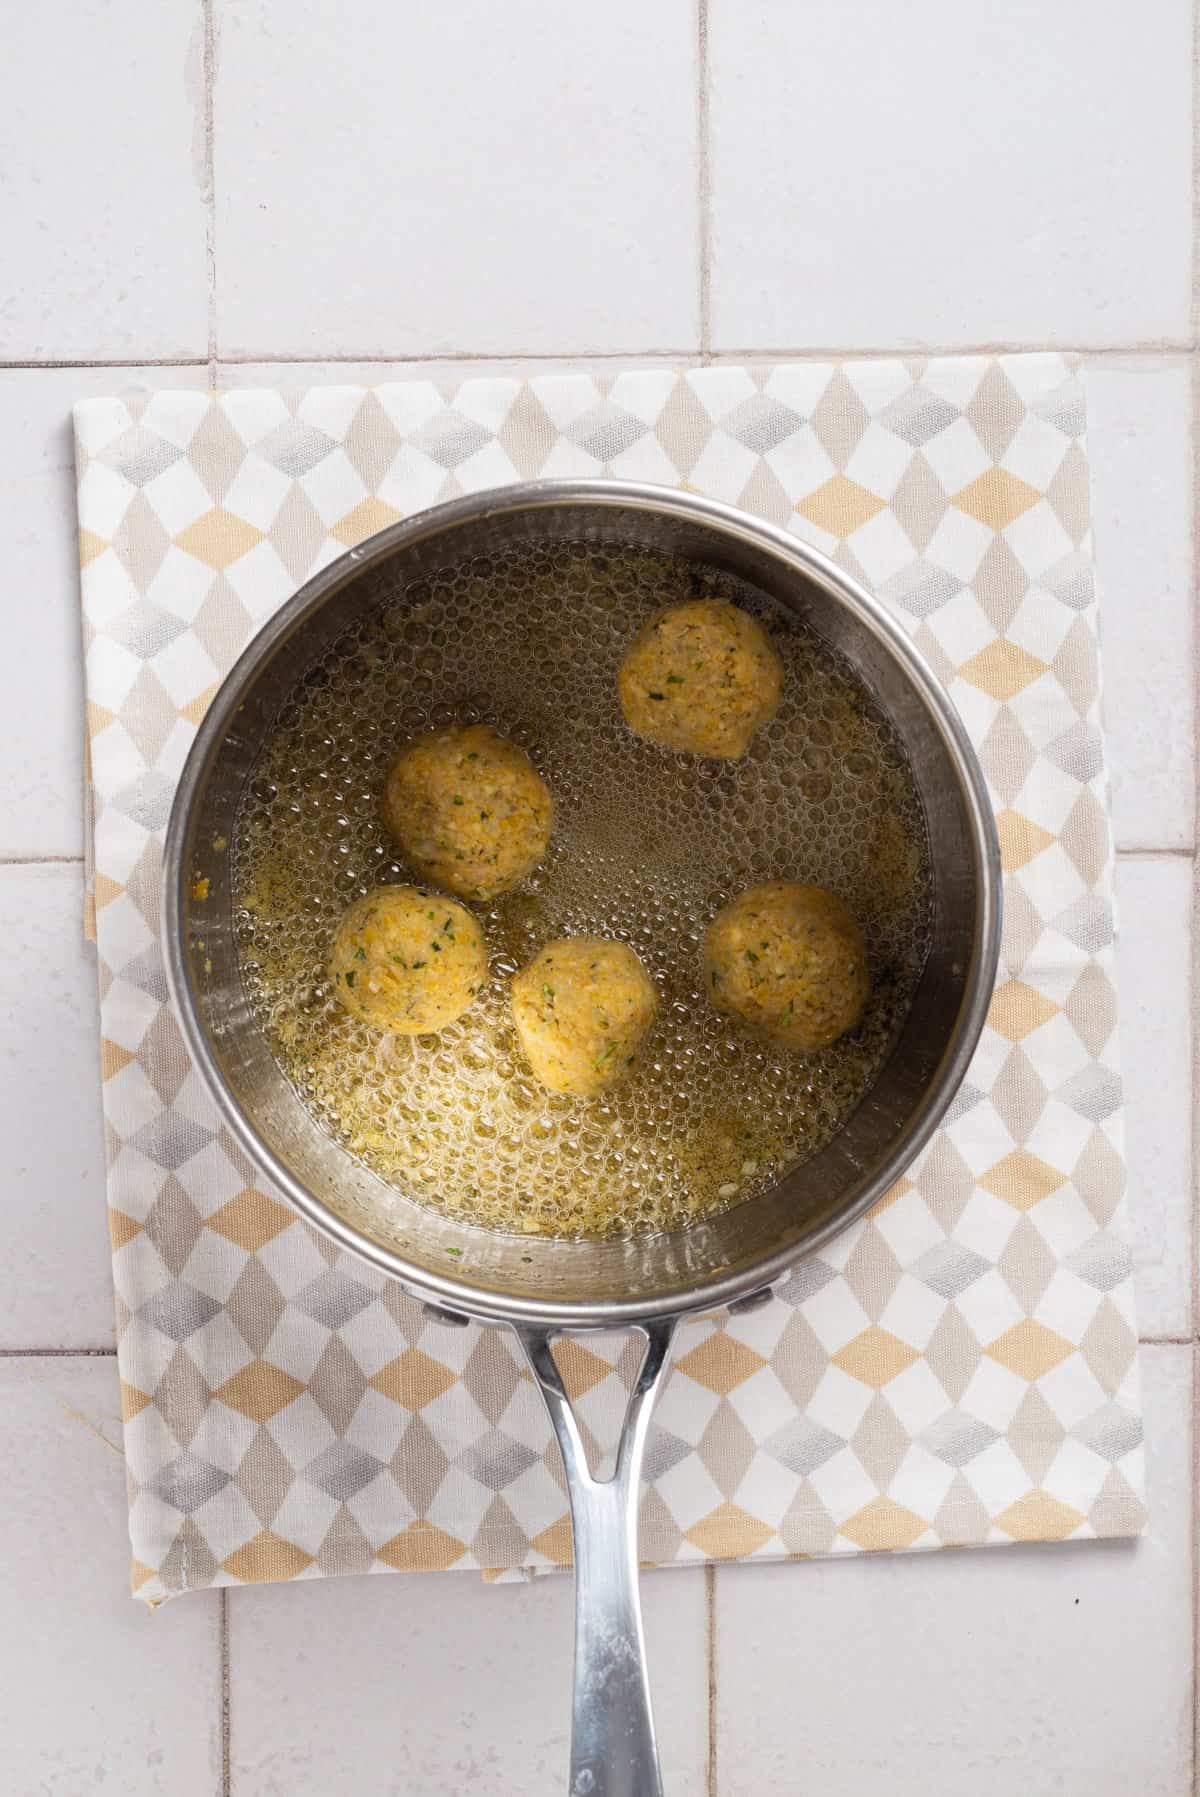 An overhead image of falafel balls being fried in a deep frying pan filled with oil.